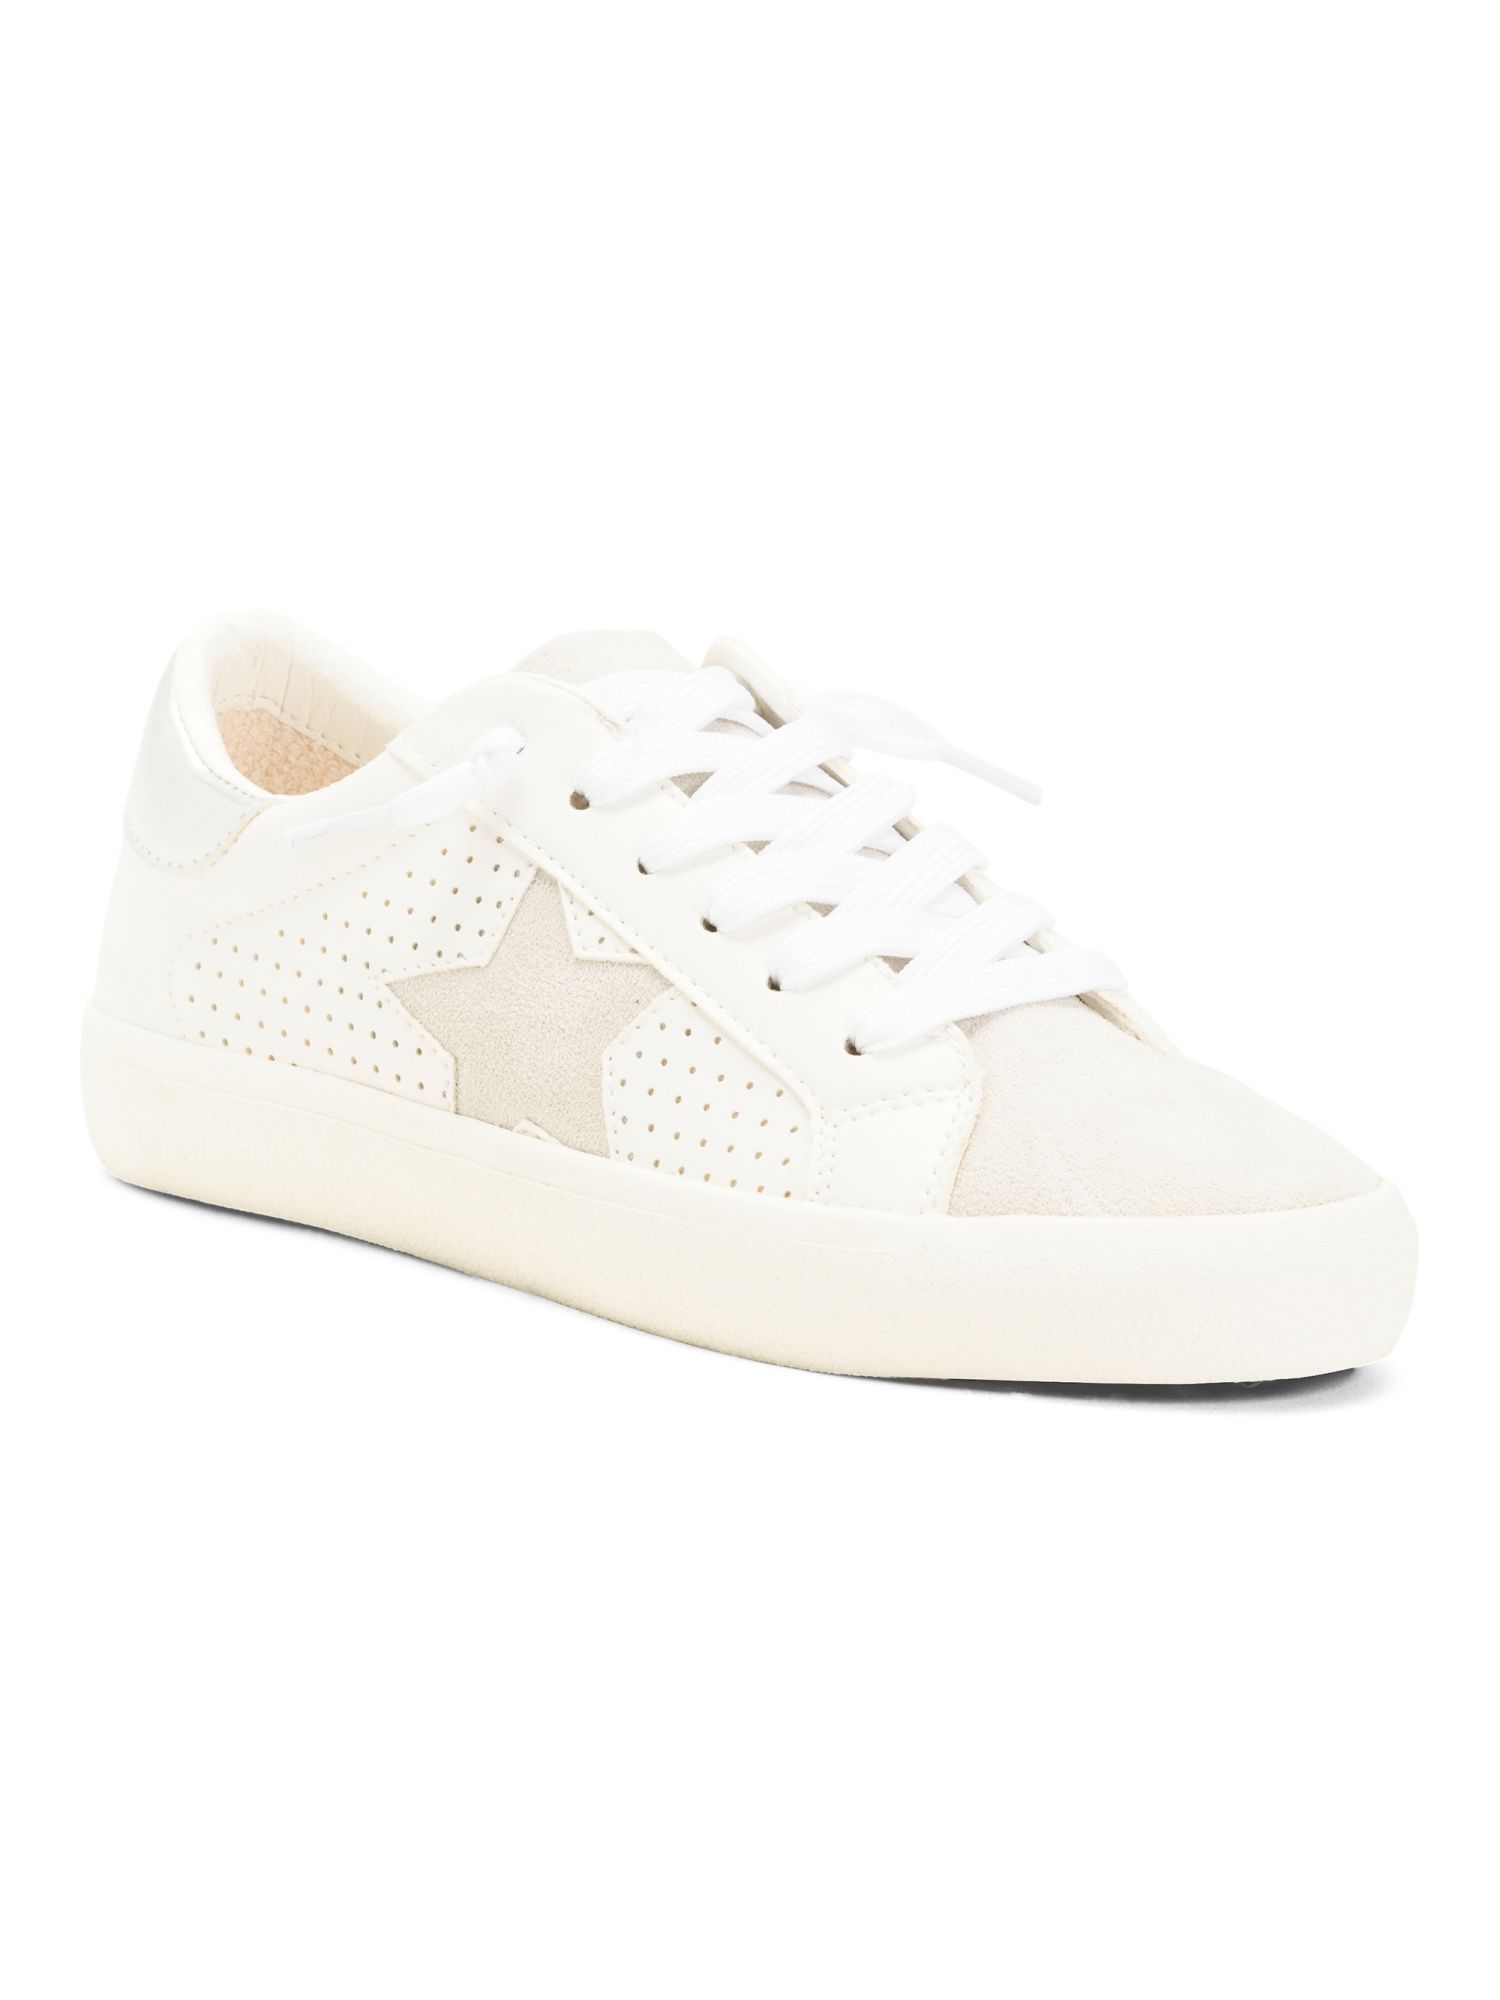 Lace Up Suede Sneakers | Women's Shoes | Marshalls | Marshalls